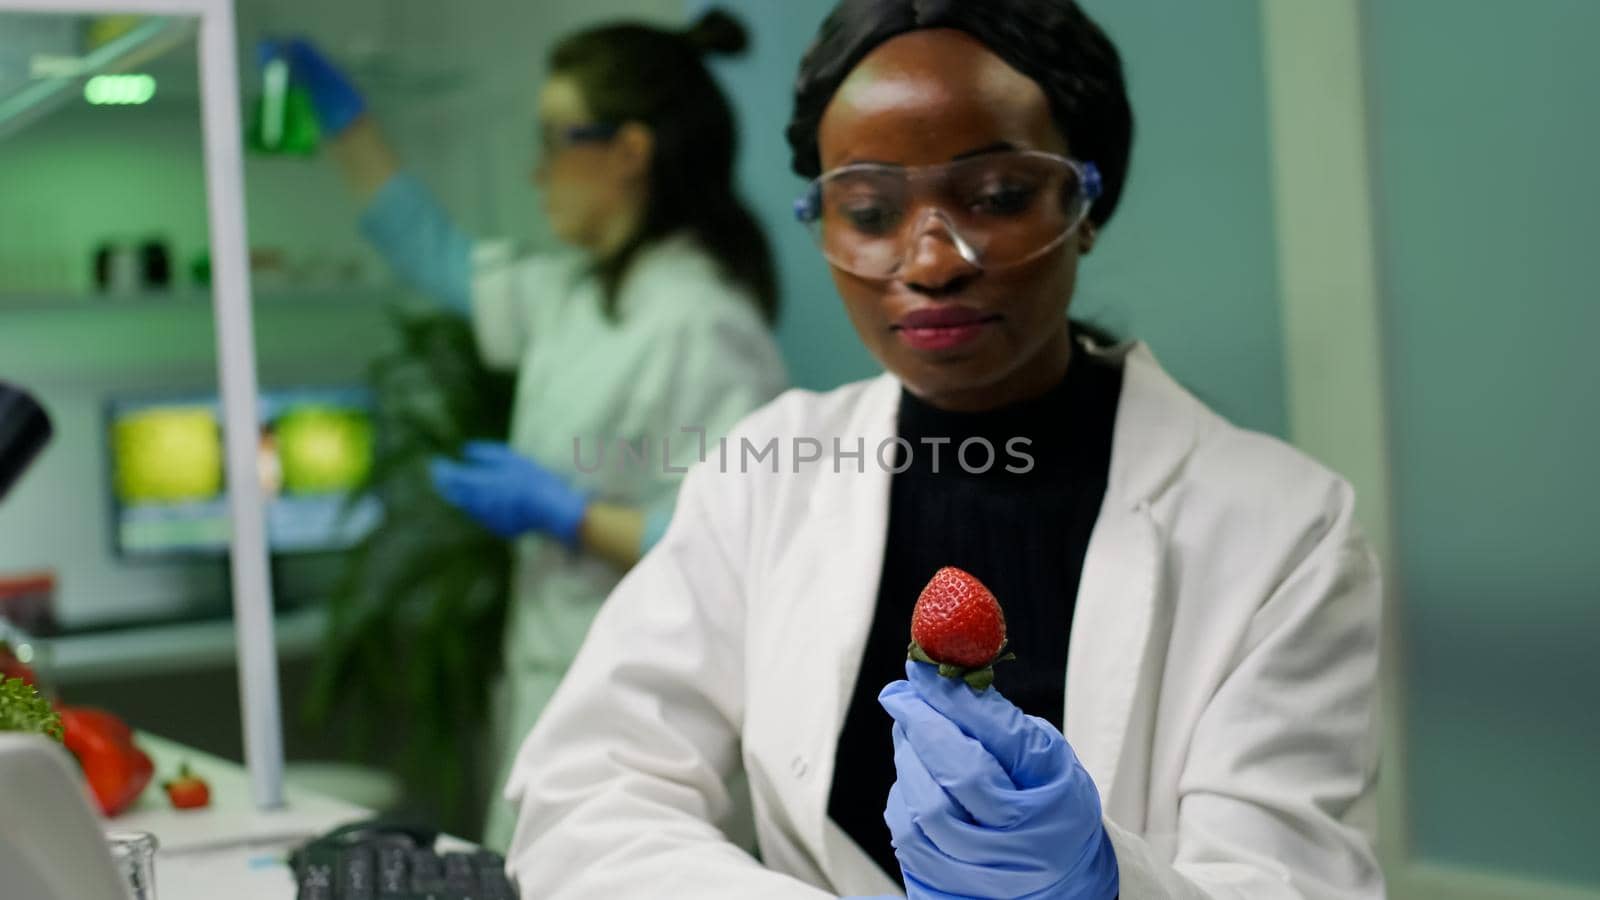 African chemist with medical glasses looking at strawberry injected with chemical pesticides examining fruits for farming researcher experiment. Biologist working in agriculture scientific lab